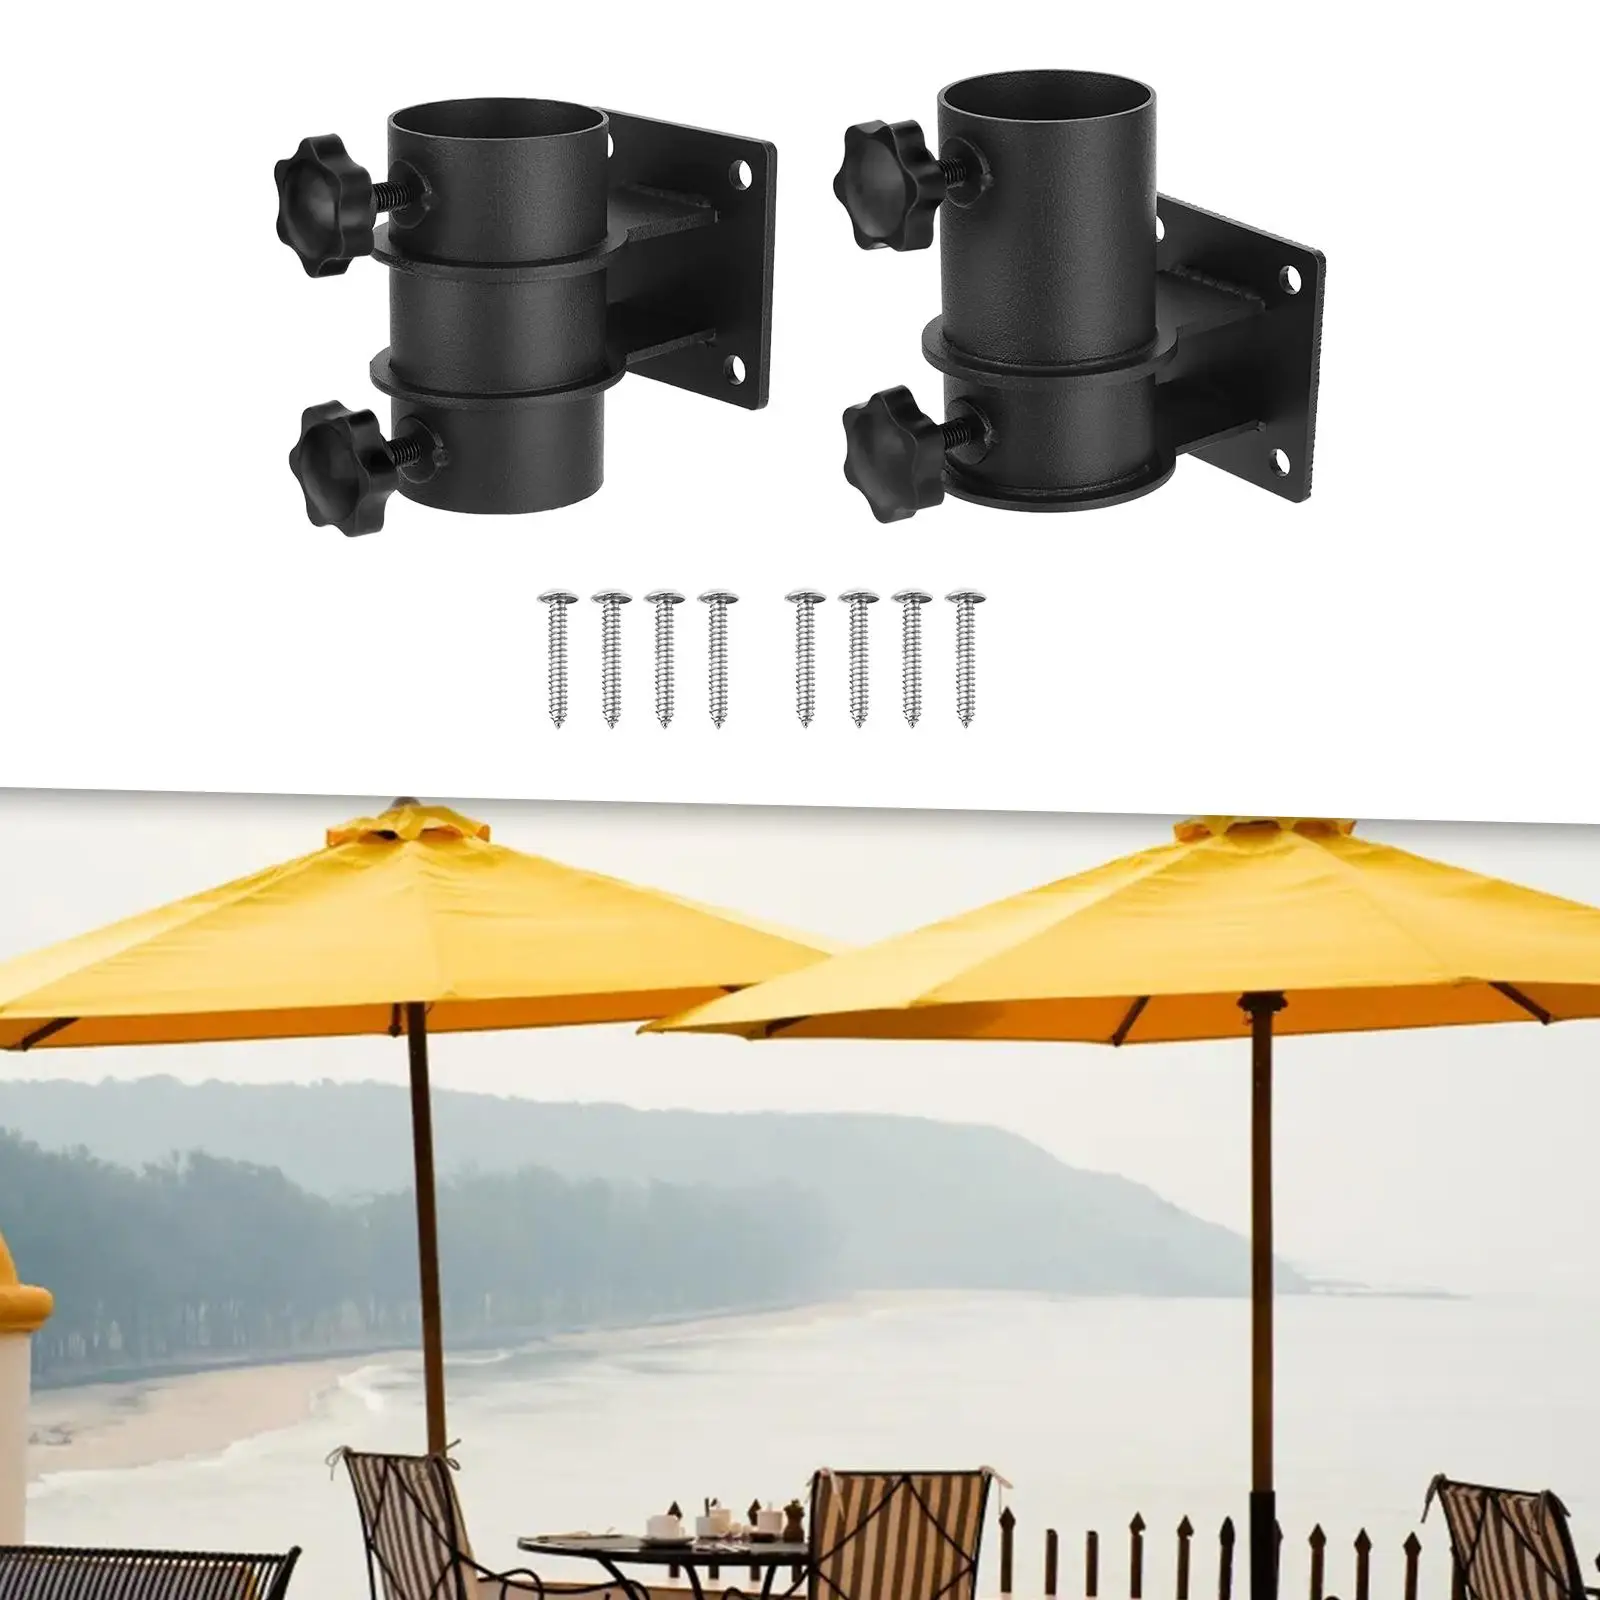 Umbrella Stand Tube Fits 30mm-50mm Pole Heavy Duty Table Umbrella Base Garden Umbrella Holder Stand for Lawn Outside Fittings